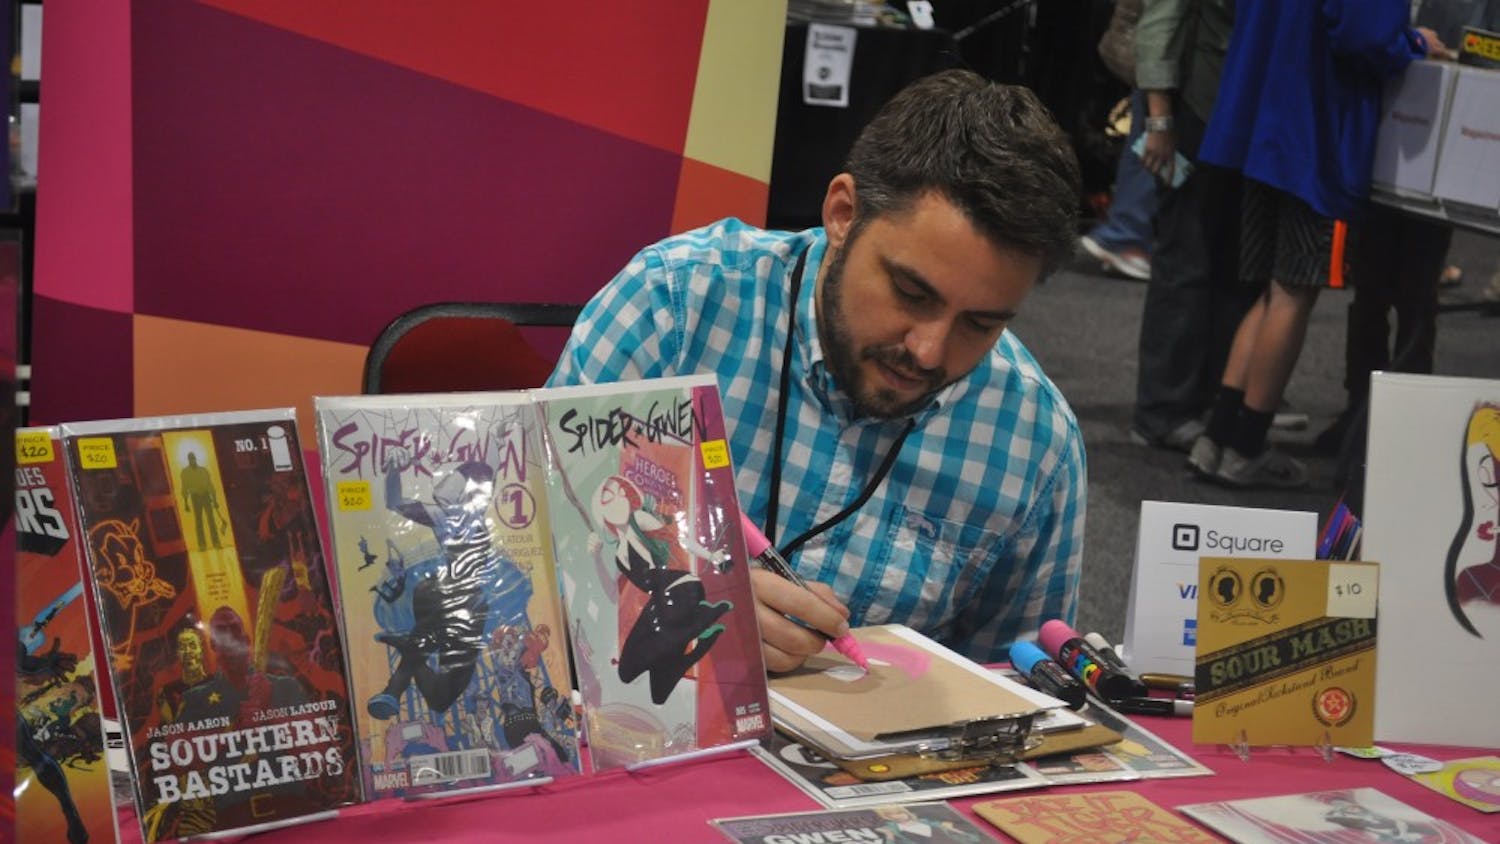 The Soda City Comic Con returns for its second year and will offer attendees the chance to meet a variety of artists.